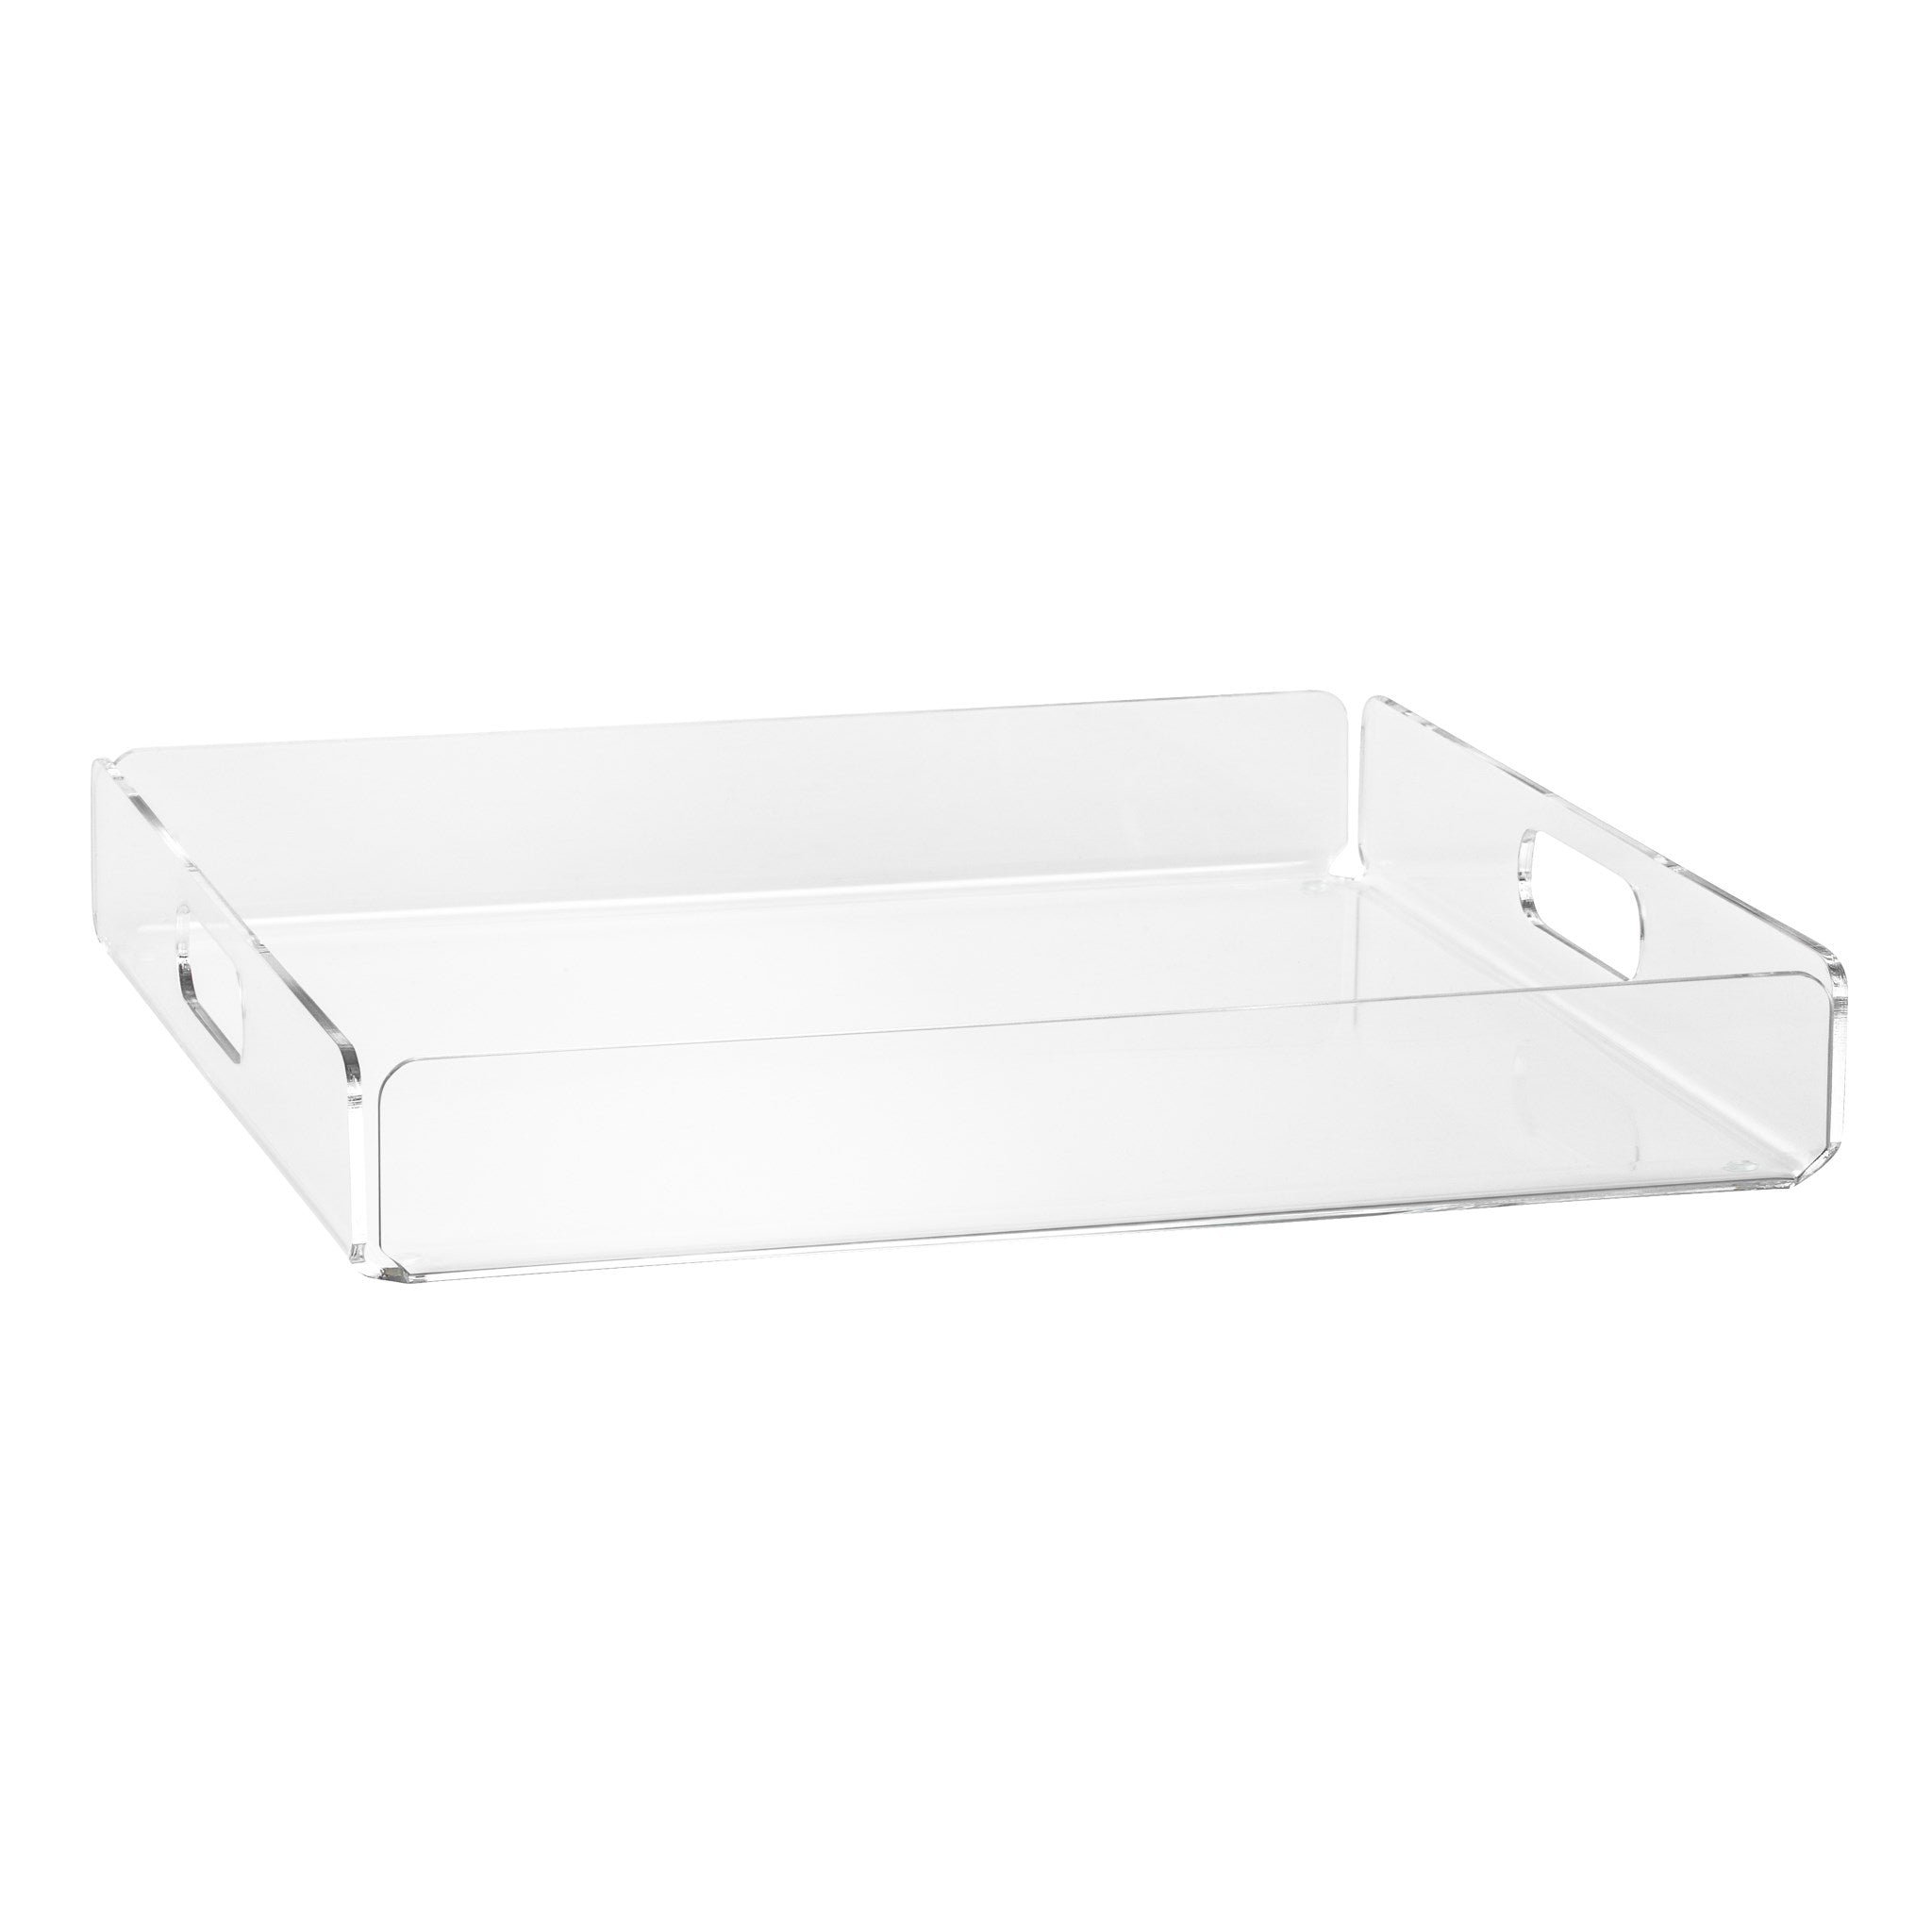 Lucite Acrylic Square Tray